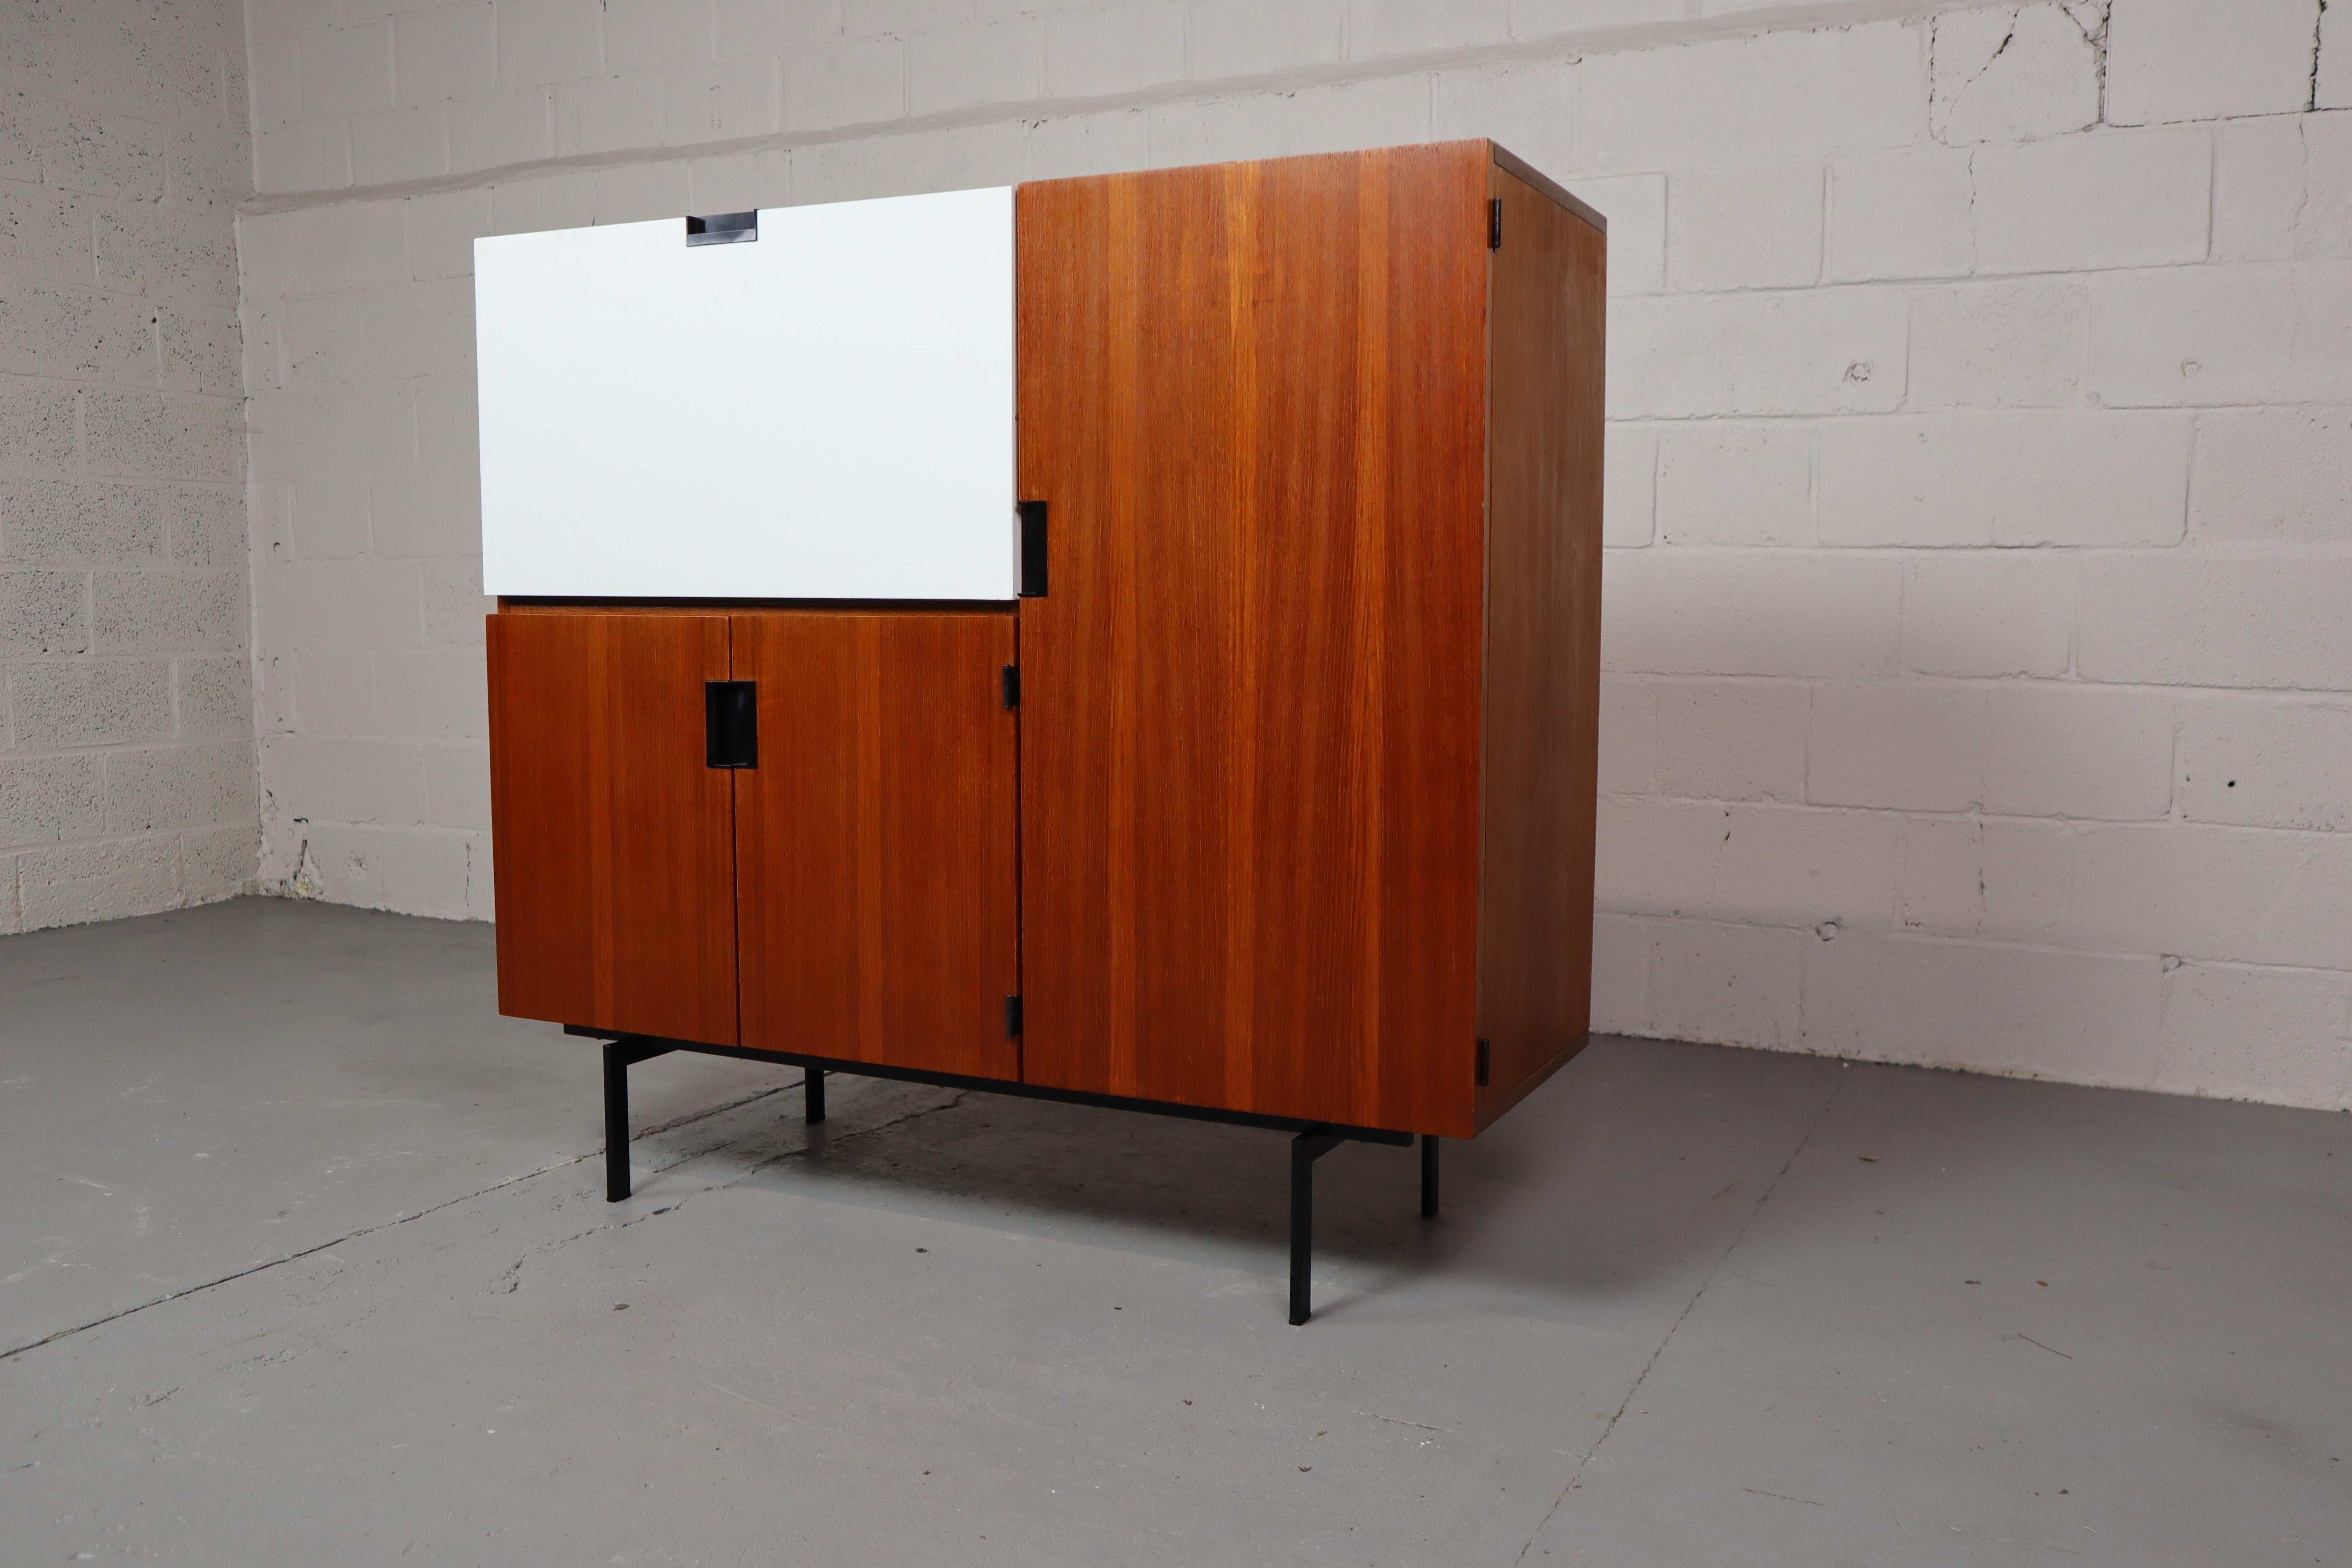 Model CU06 teak cabinet designed by Cees Braakman for Pastoe in 1958.
This model is part of the Japanese series and is a real Dutch design classic.
The CU06 model has a white drop down door on the left with a shelf, 2 folding doors underneath with a